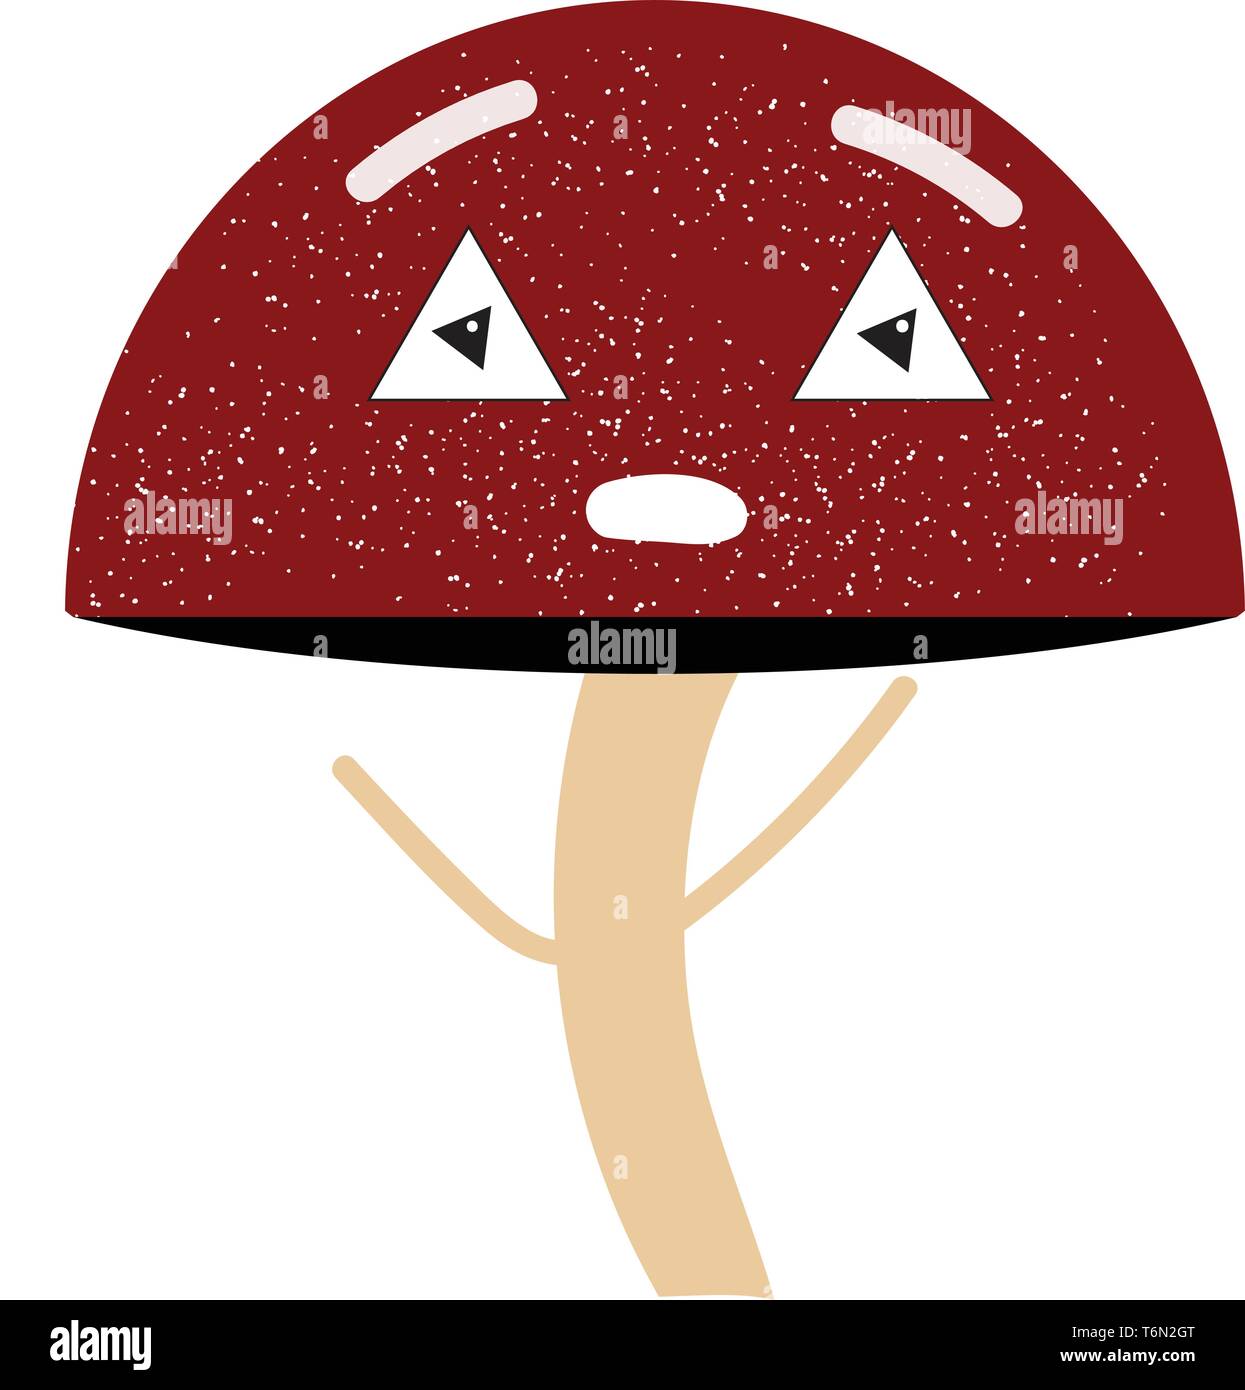 A highly regarded edible mushroom with black gills  peach stem  and a distinctive red cap has spotted white polka dots  triangular eyes  rose eyebrows Stock Vector